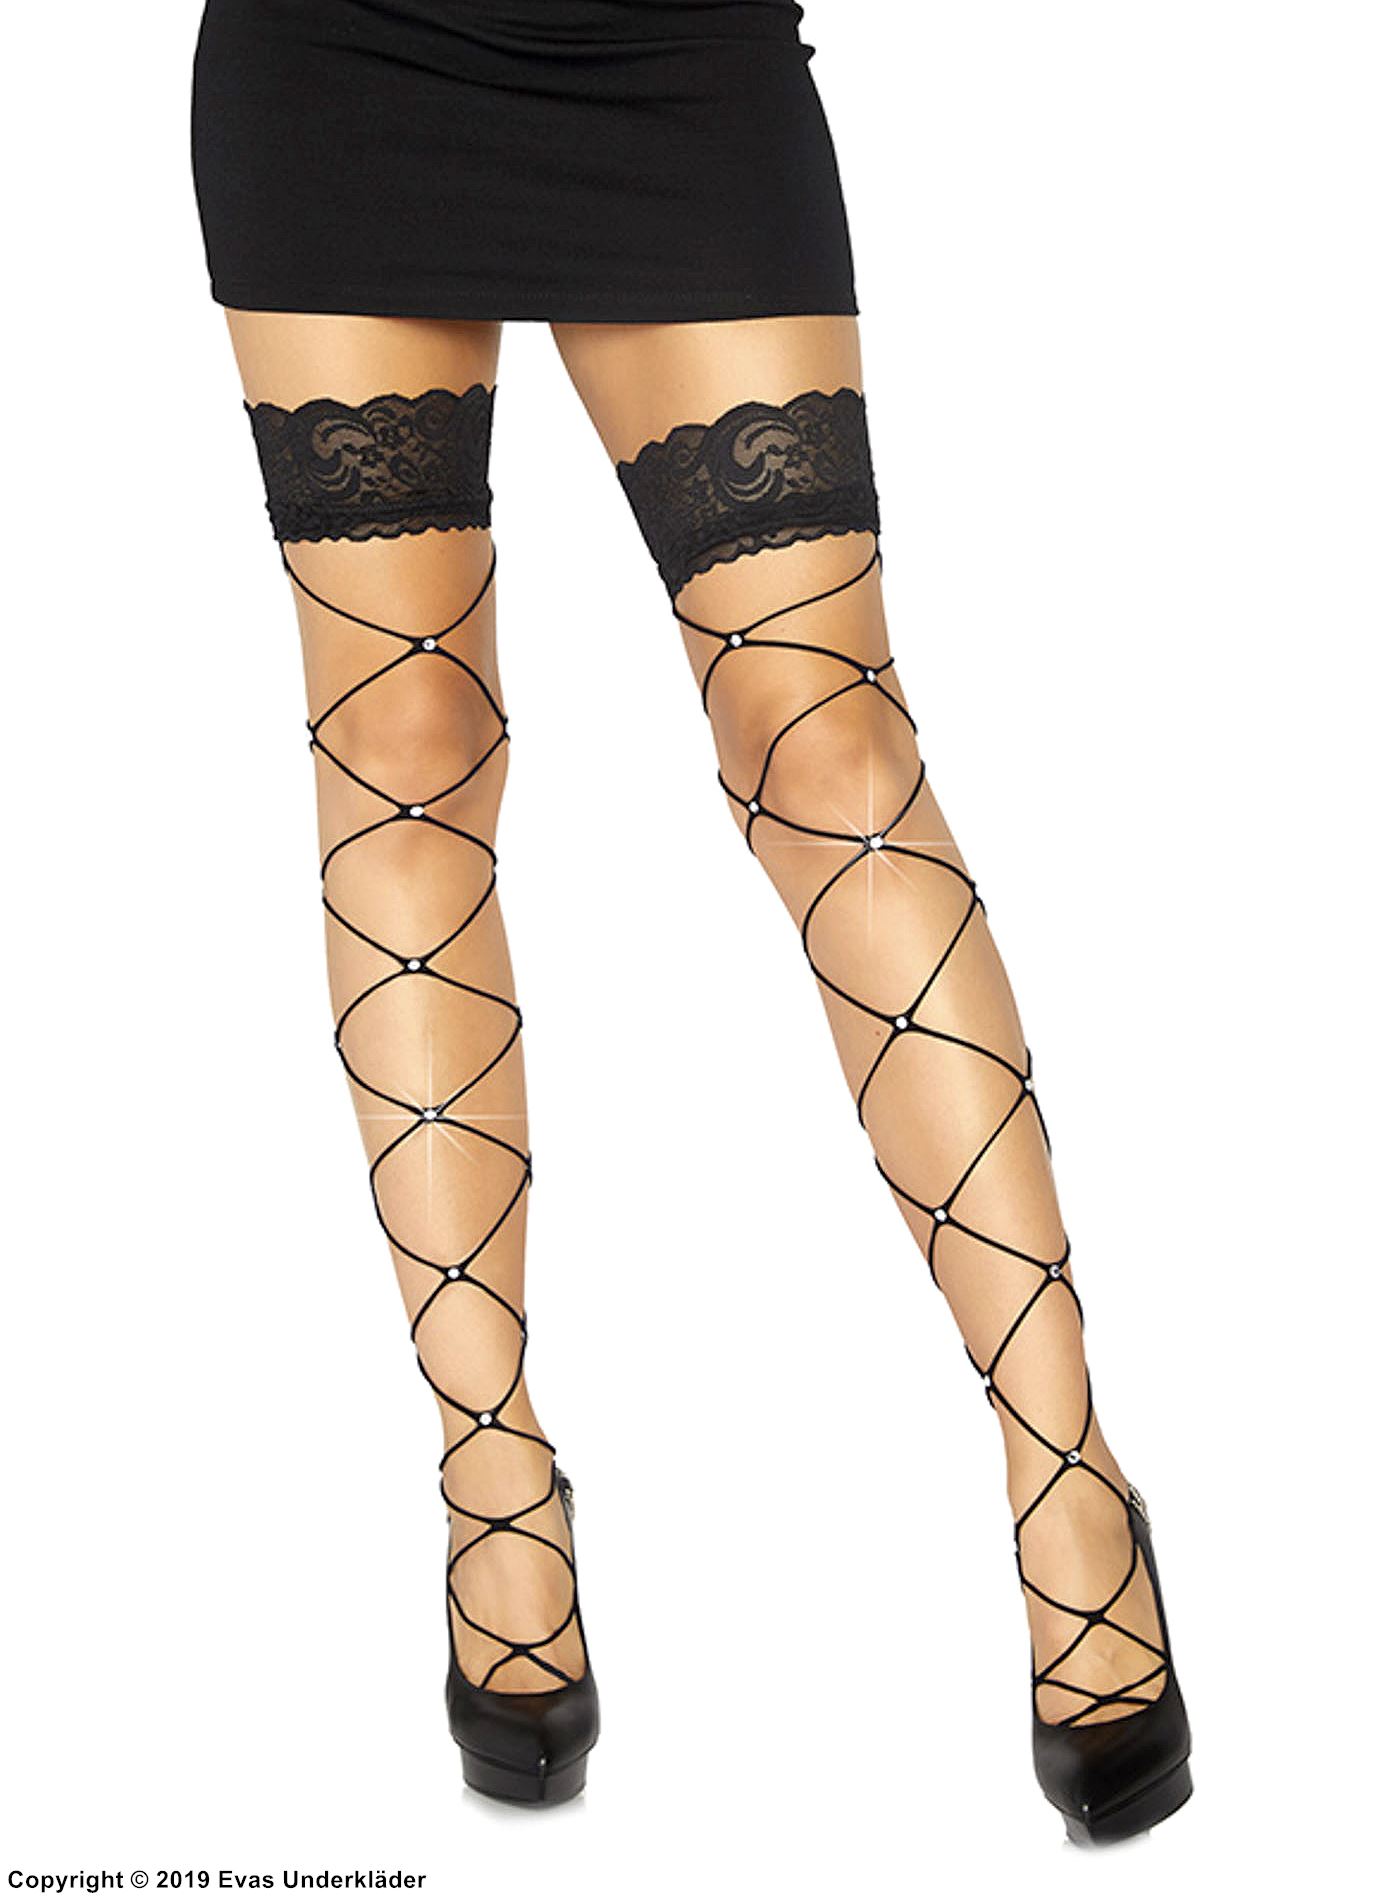 Thigh highs, rhinestones, wide lace edge, large fishnet